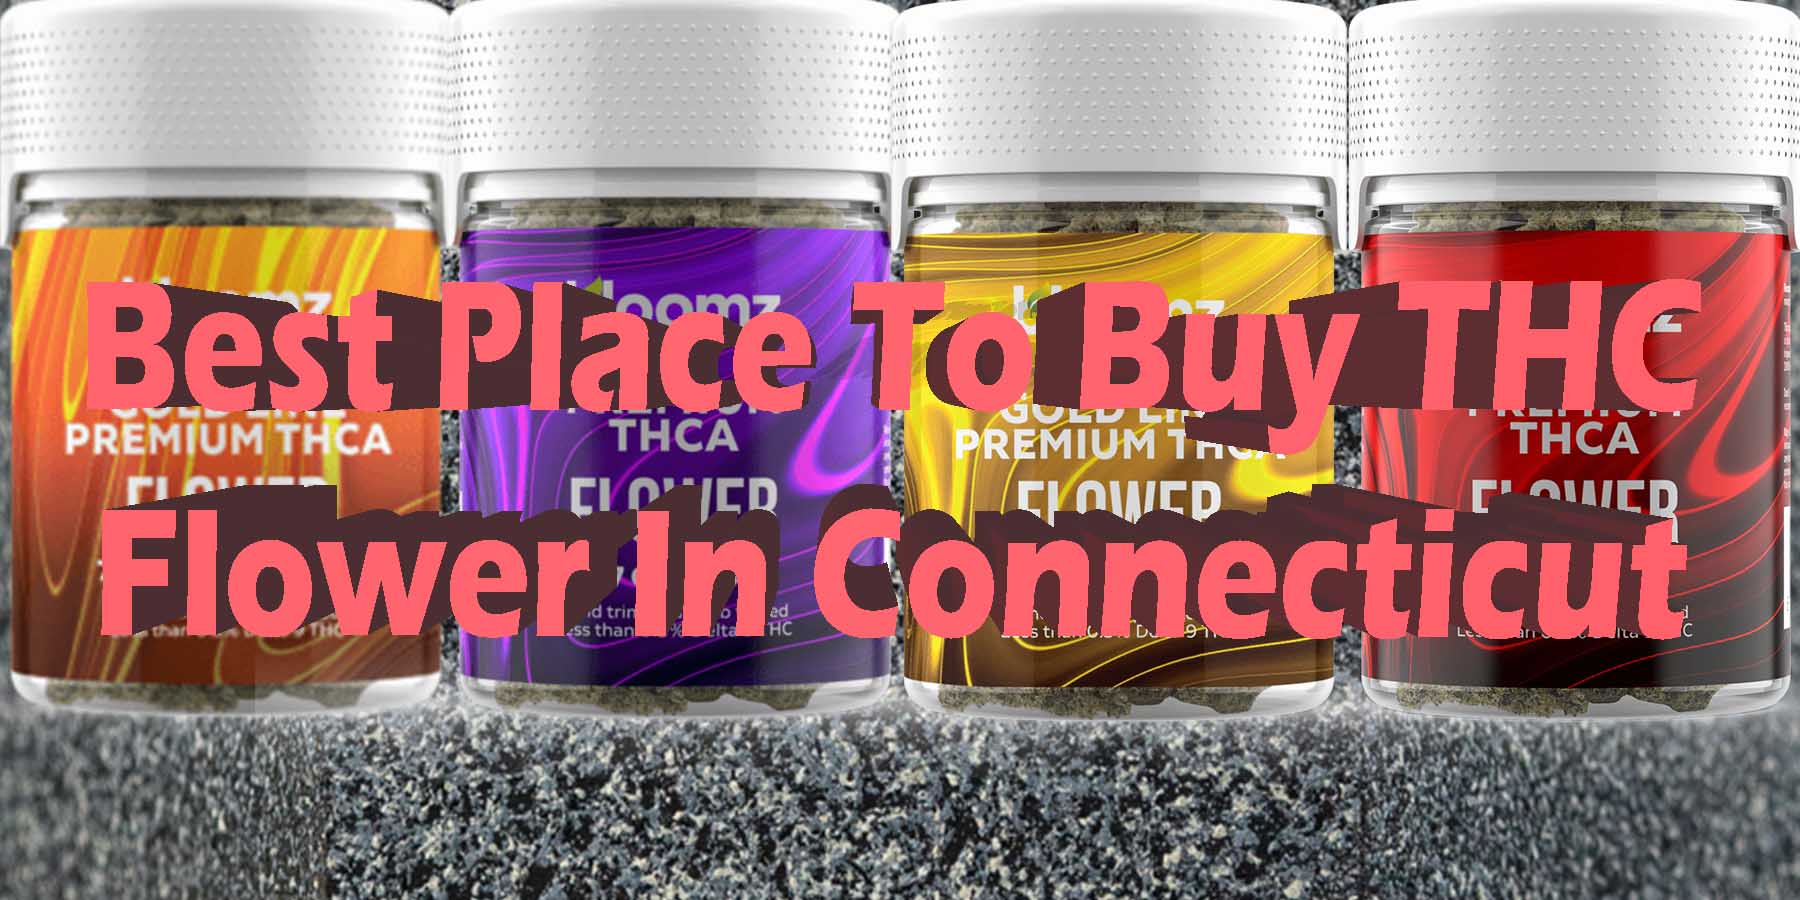 Best Place To Buy THC Flower in Connecticut WhereToGet HowToGetNearMe BestPlace LowestPrice Coupon Discount For Smoking Best High Smoke Shop Online Near Me StrongestBrand BestBrand